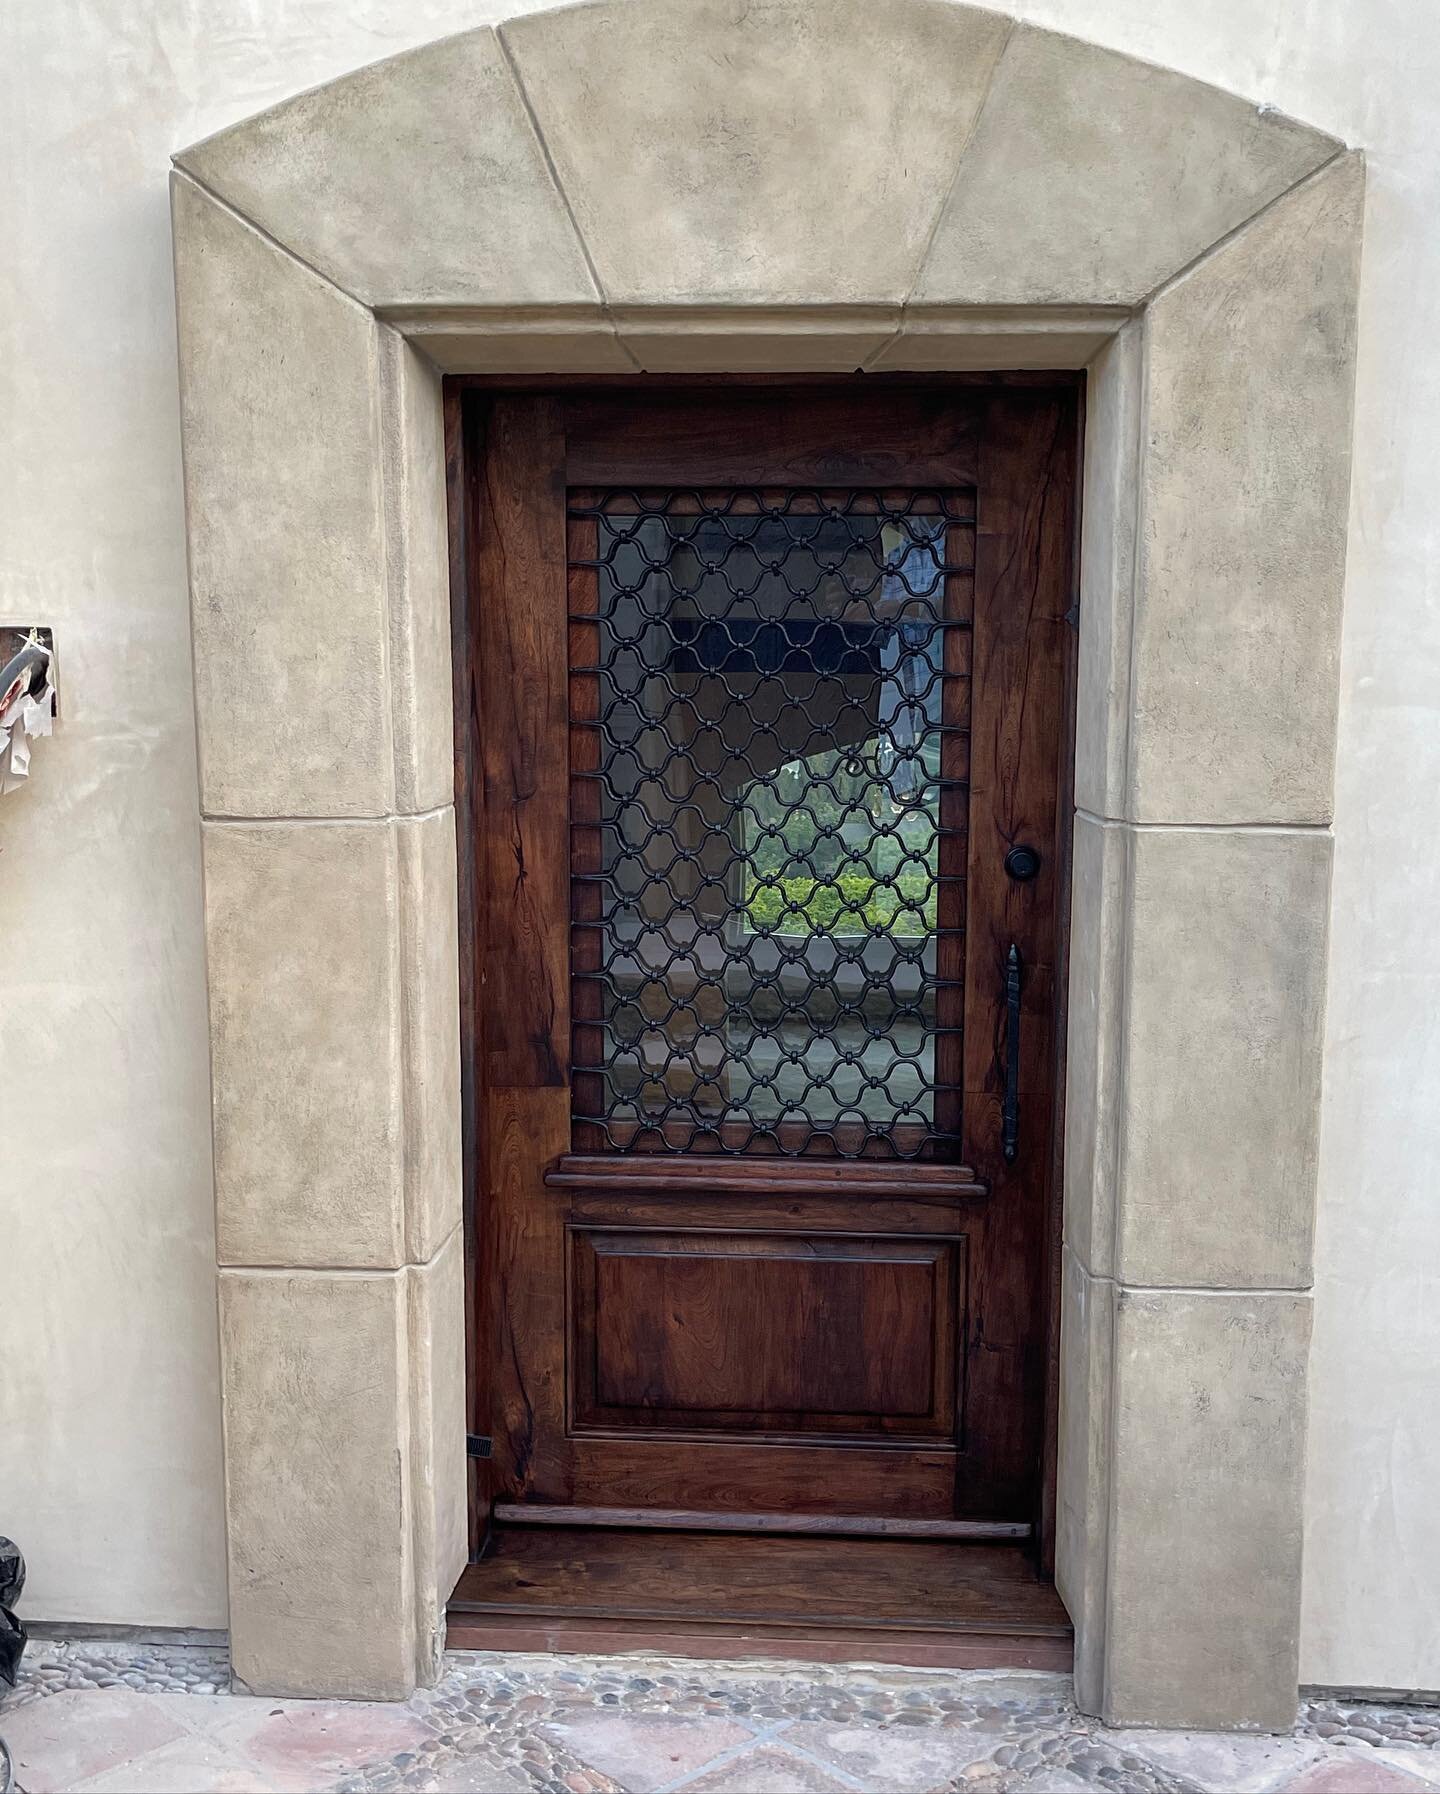 Just installed, this mesquite wood door with iron compliments the entry to this beautiful 1930&rsquo;s California home. #customdoors #doorsofinstagram #exteriordesign #californiahomes #architecture #beautifulhomes #doors #craftsmanship #iconicarchite